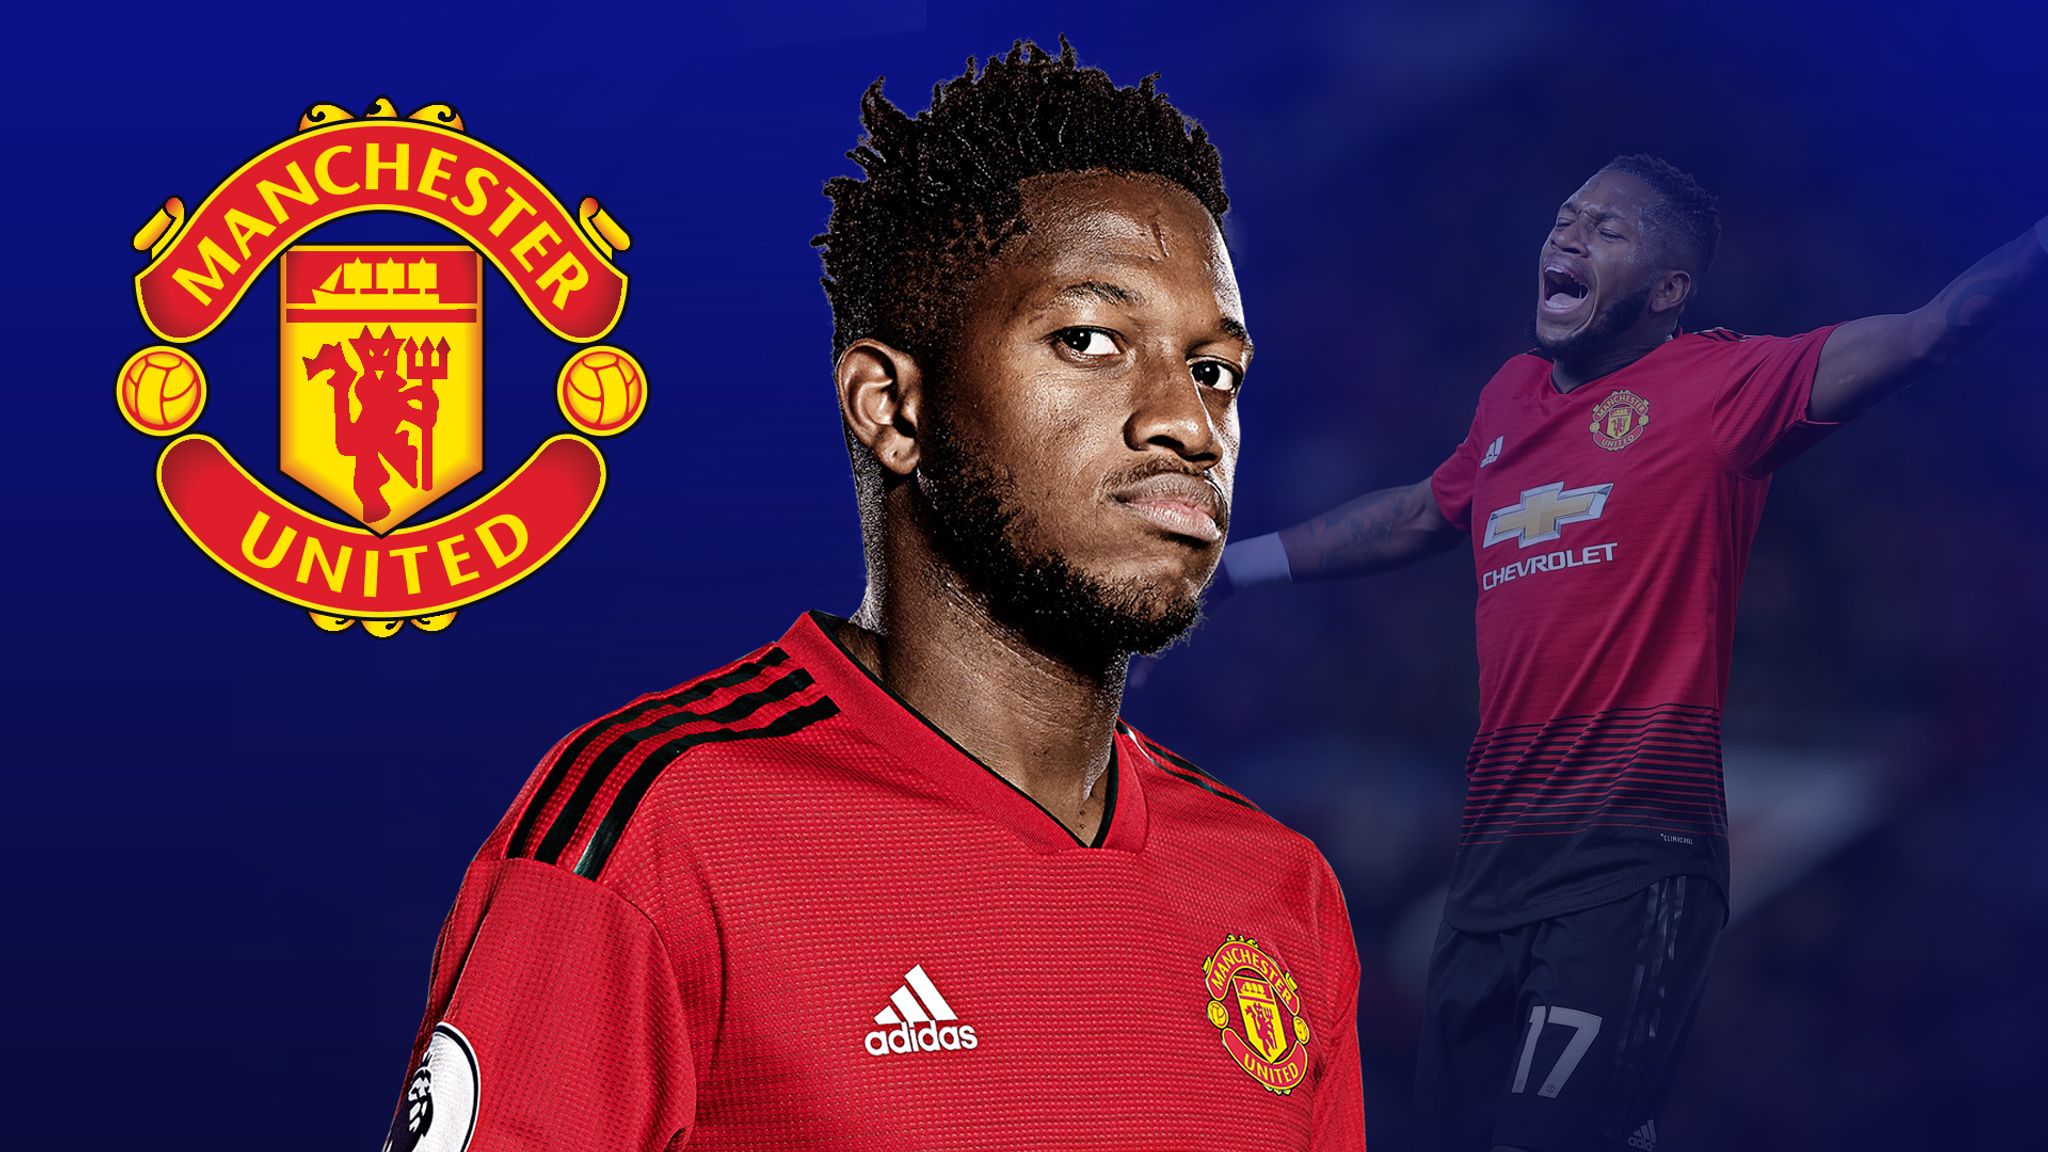 Manchester United's Fred is still a mystery to the club's supporters